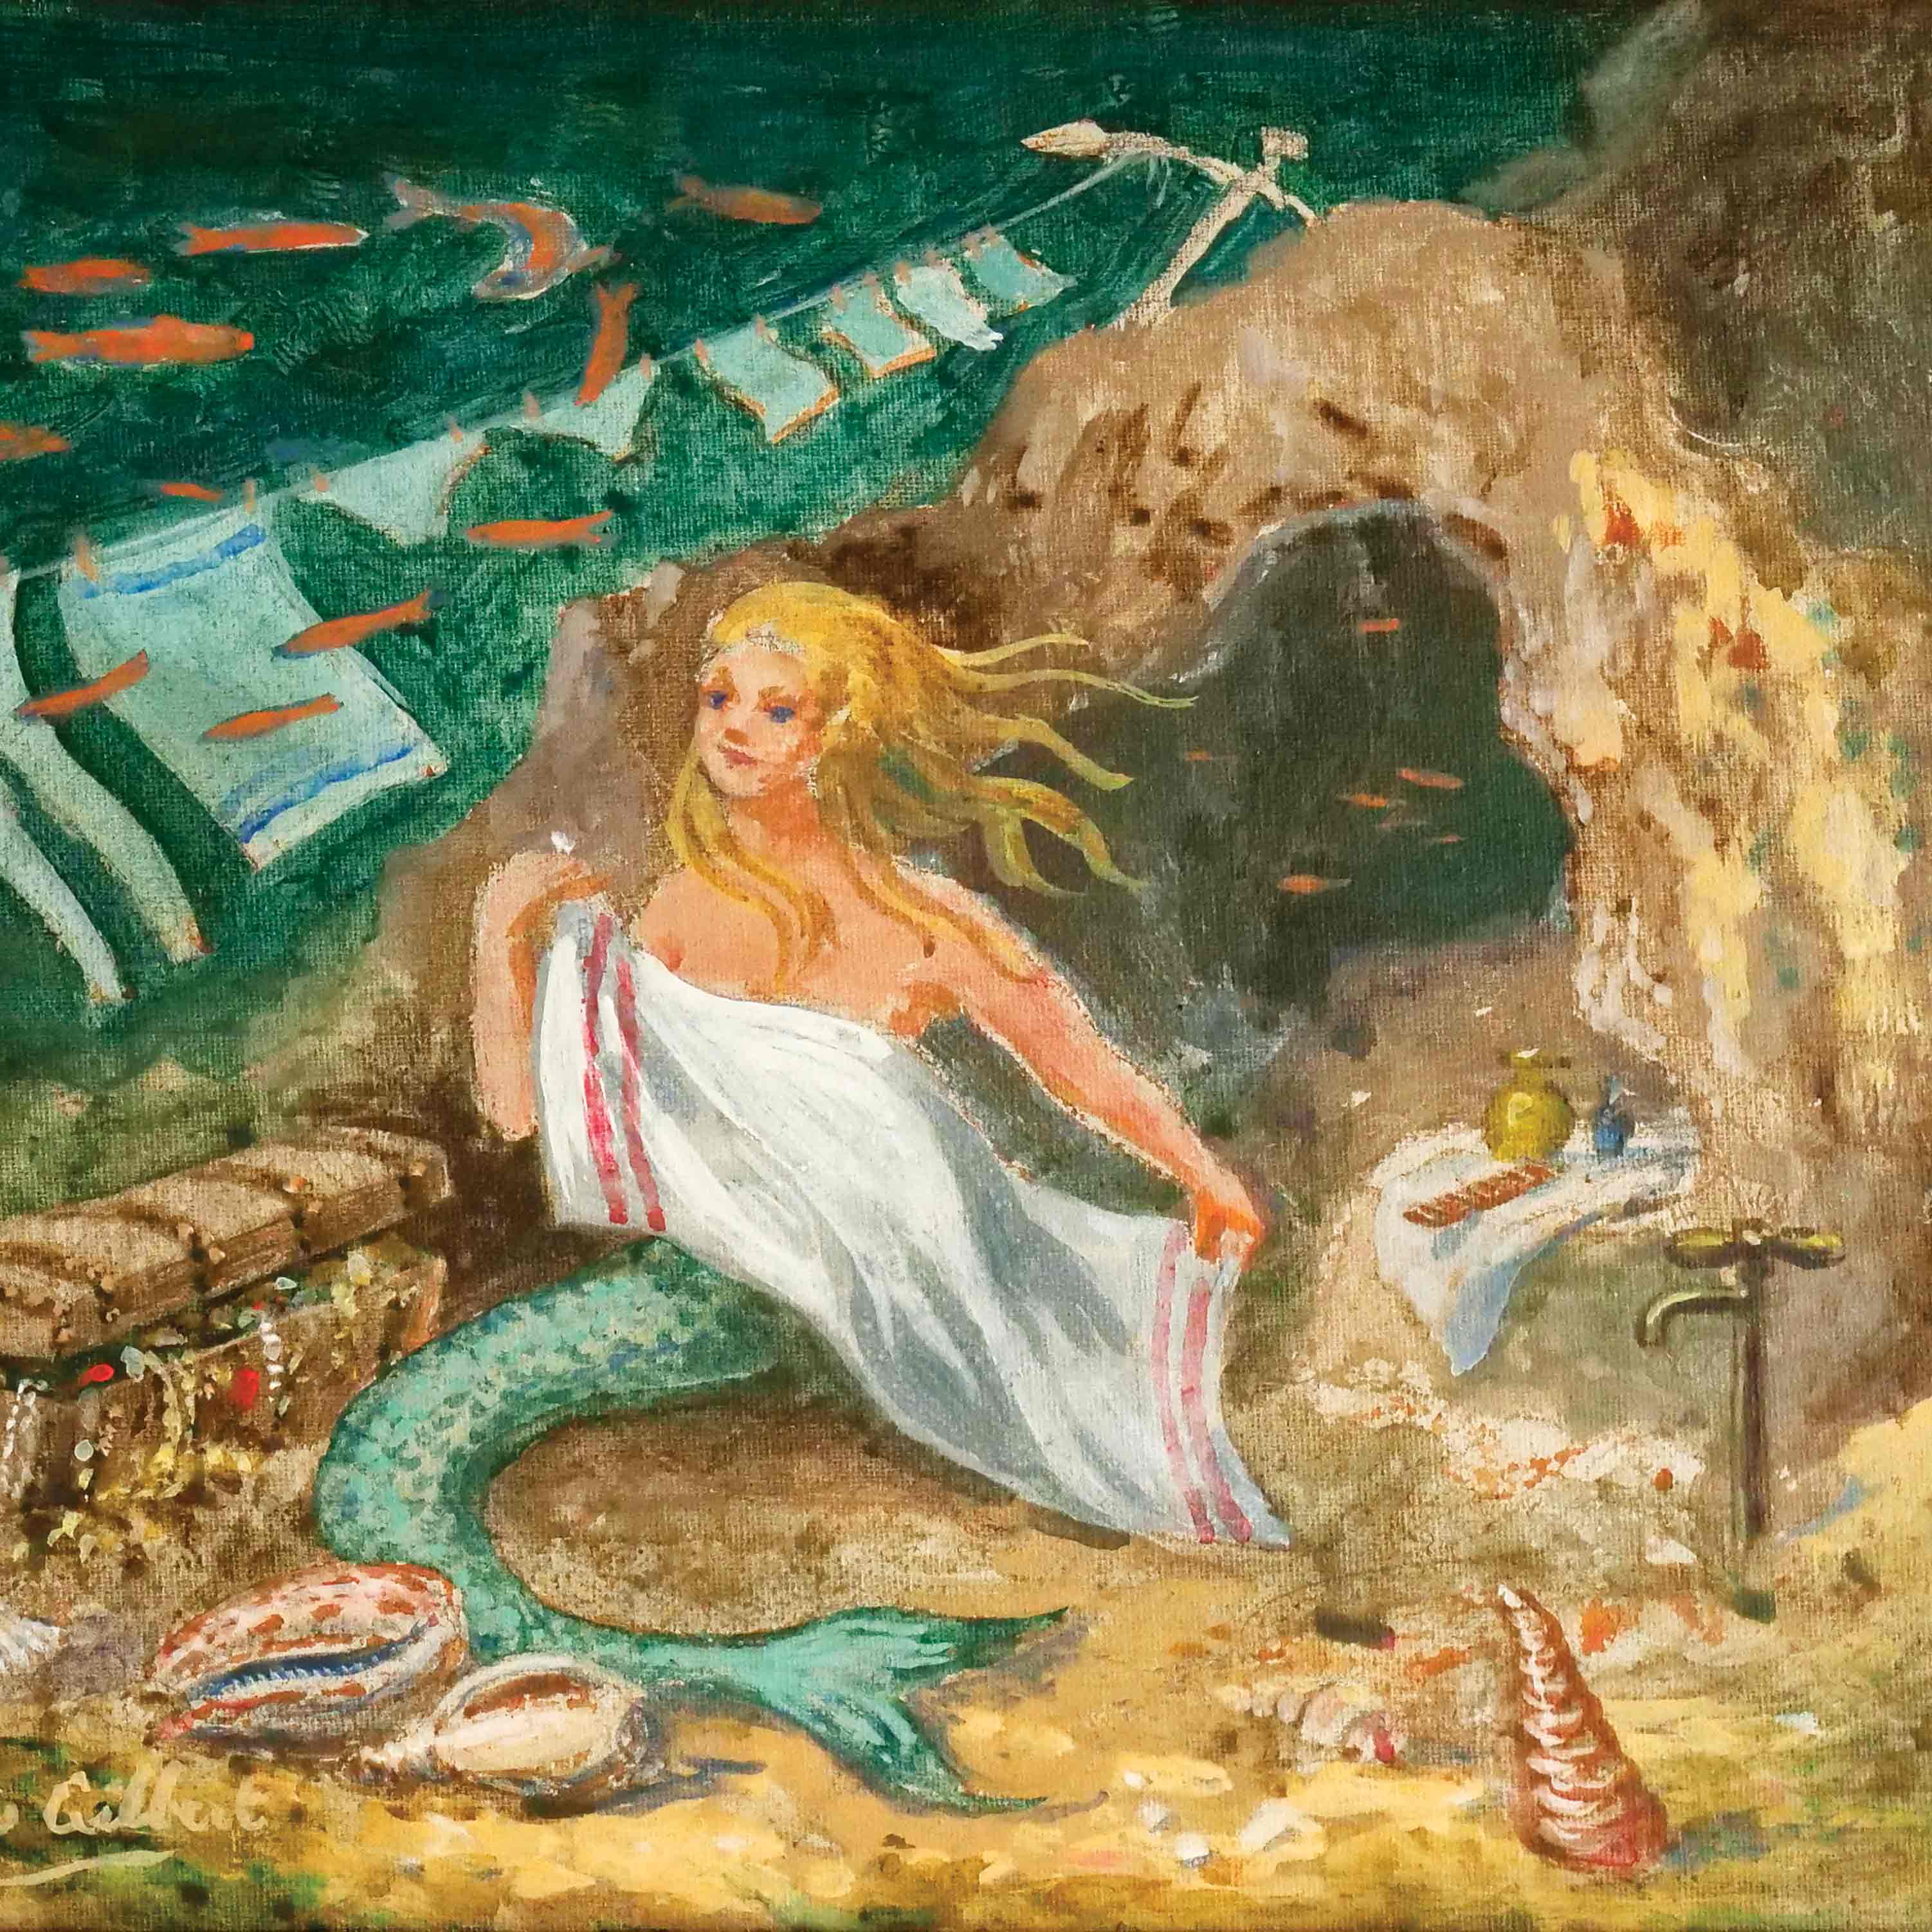 Art Greeting Card by Dennis Gilbert, A Drying Problem, Oilpainting, Mermaid drying herself with towel under the sea